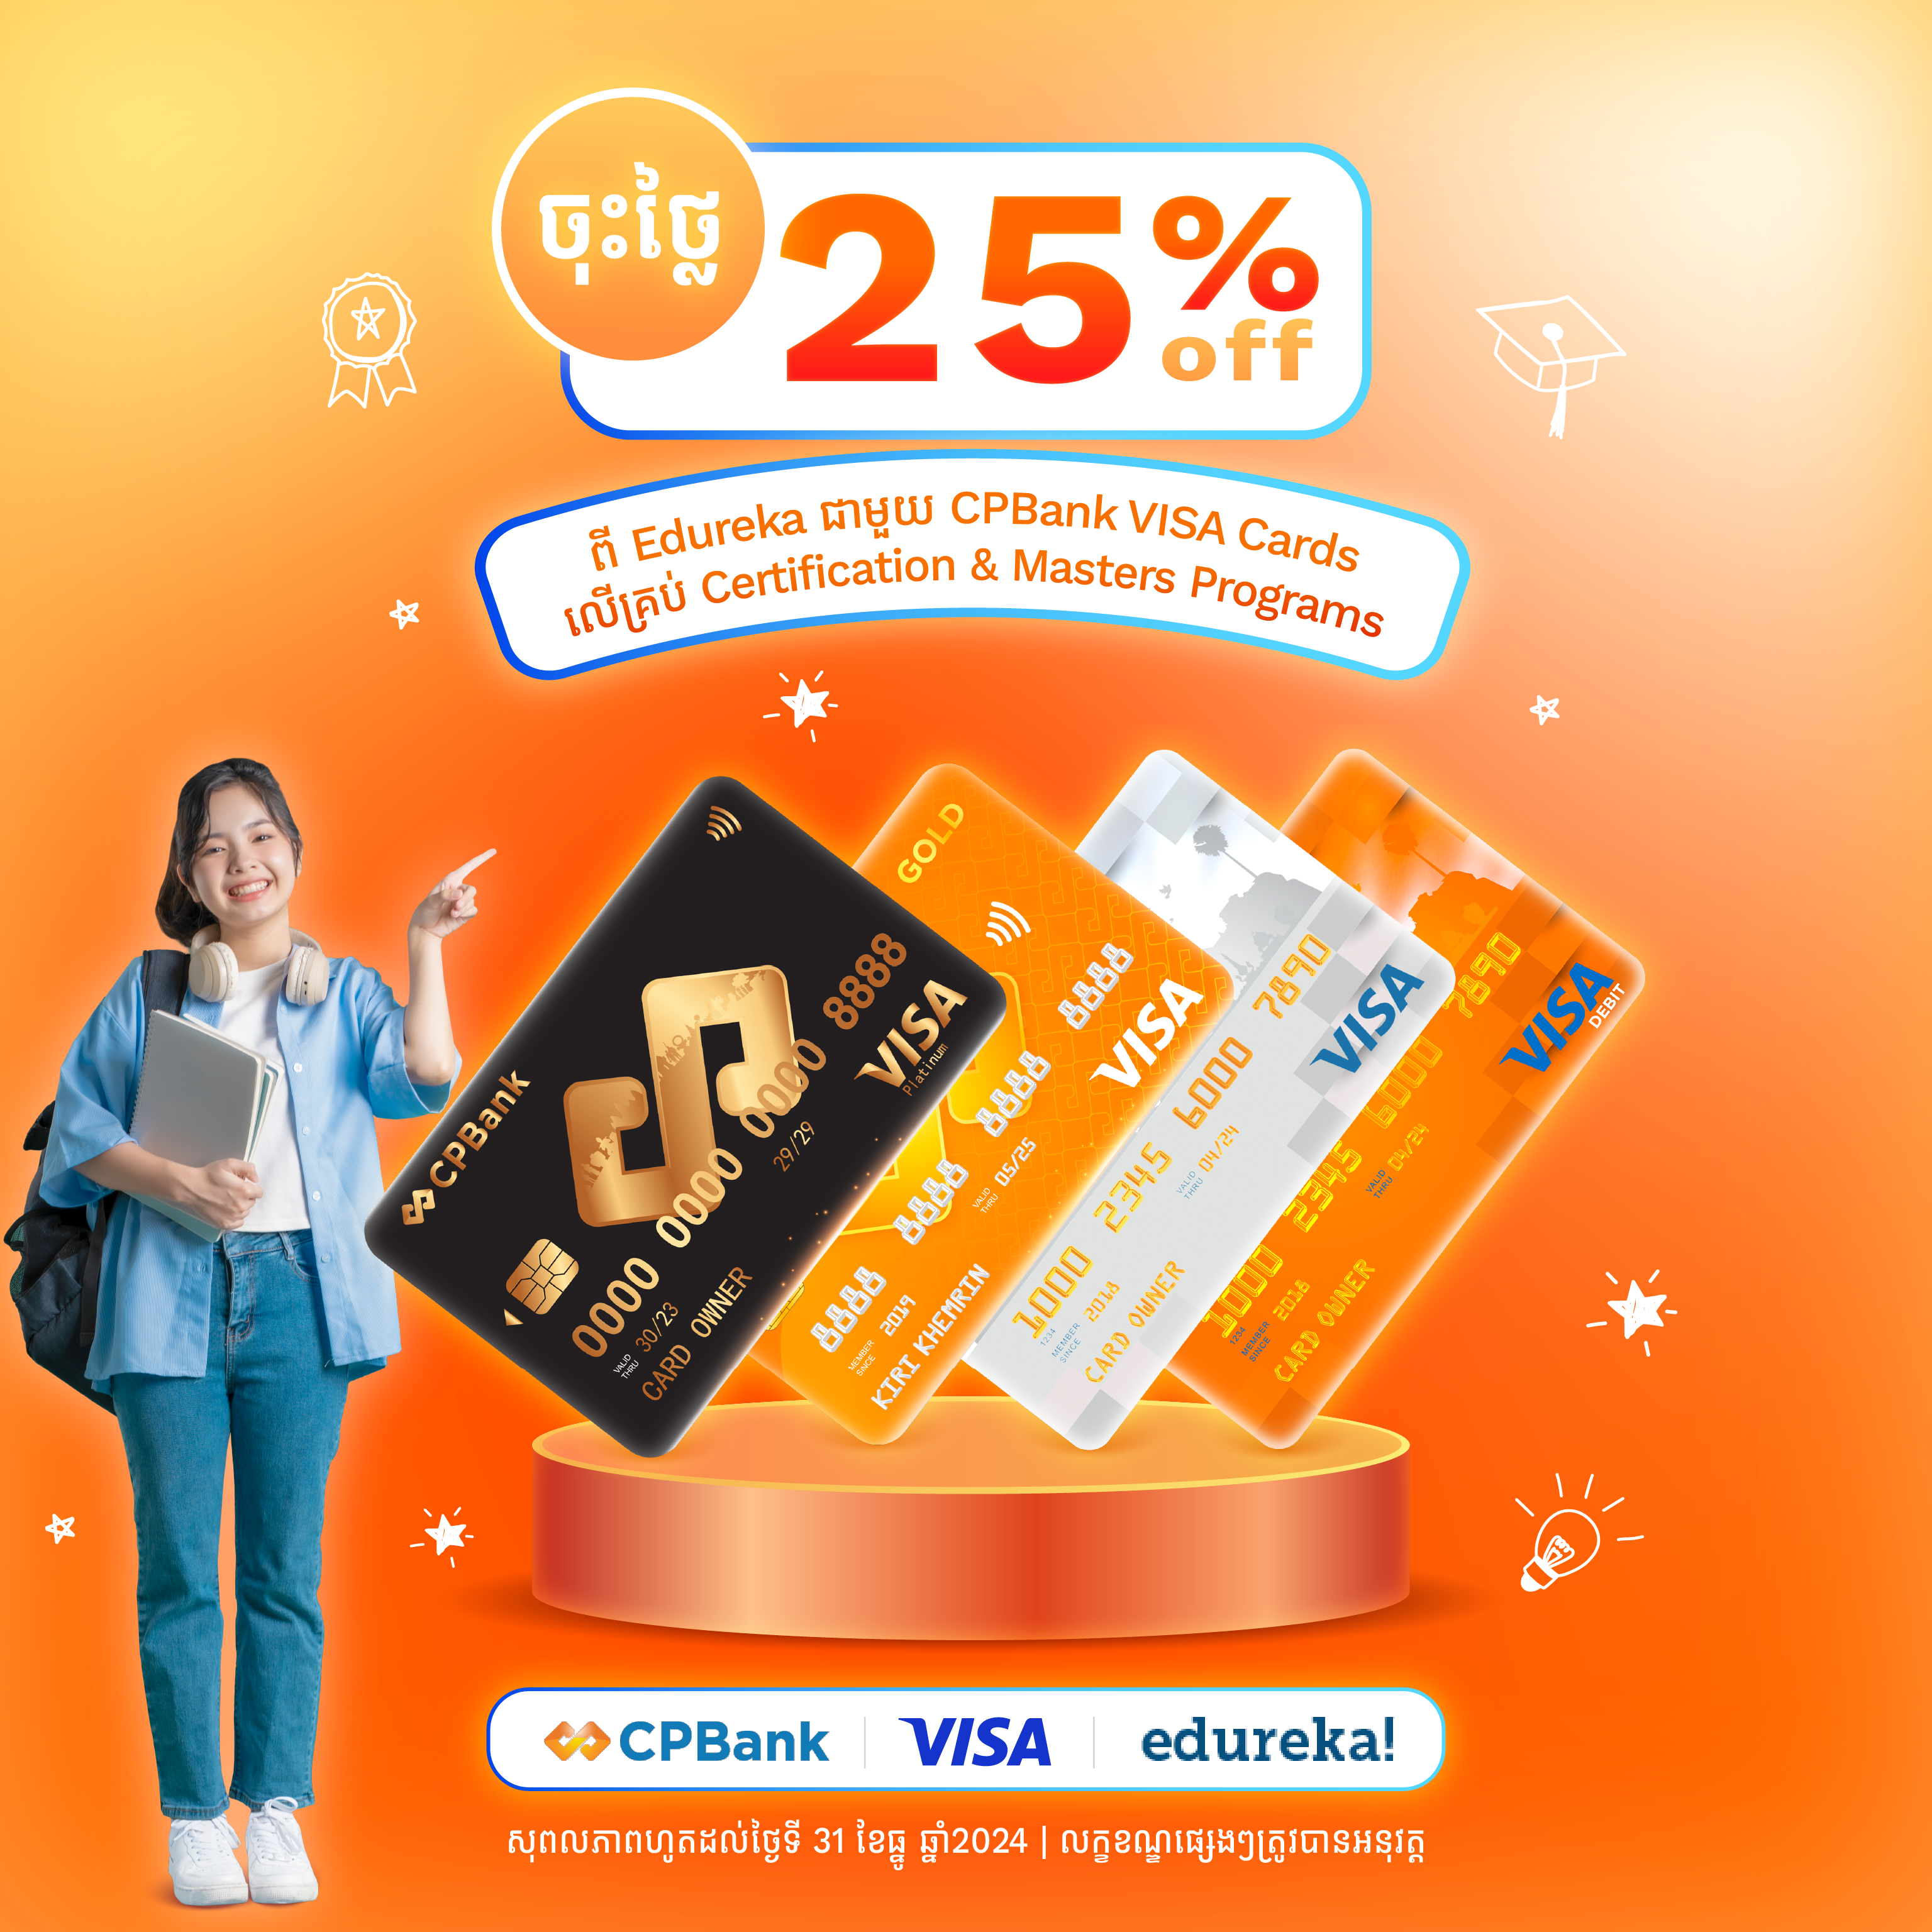 Get 25% off all programs from Edureka with your CPBank VISA cards